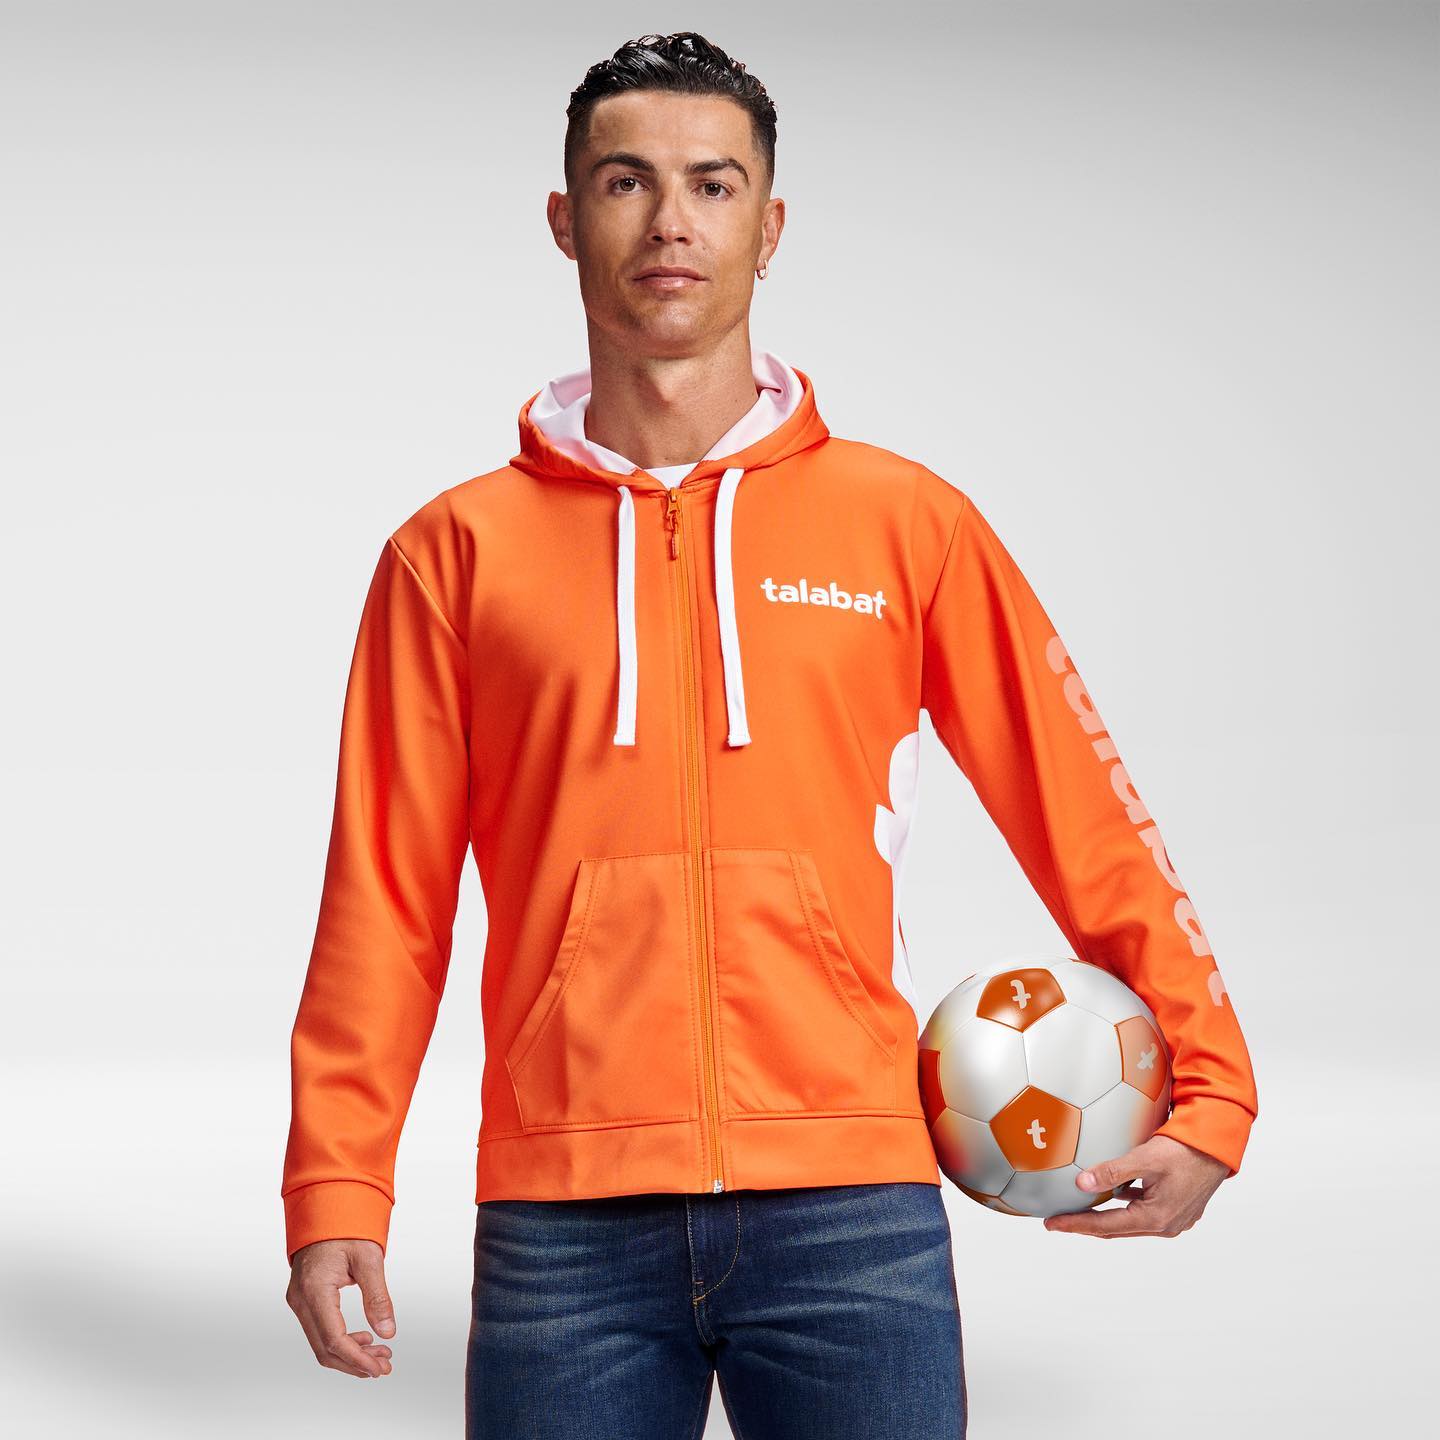 Cristiano Ronaldo and Lionel Messi play chess shirt, hoodie